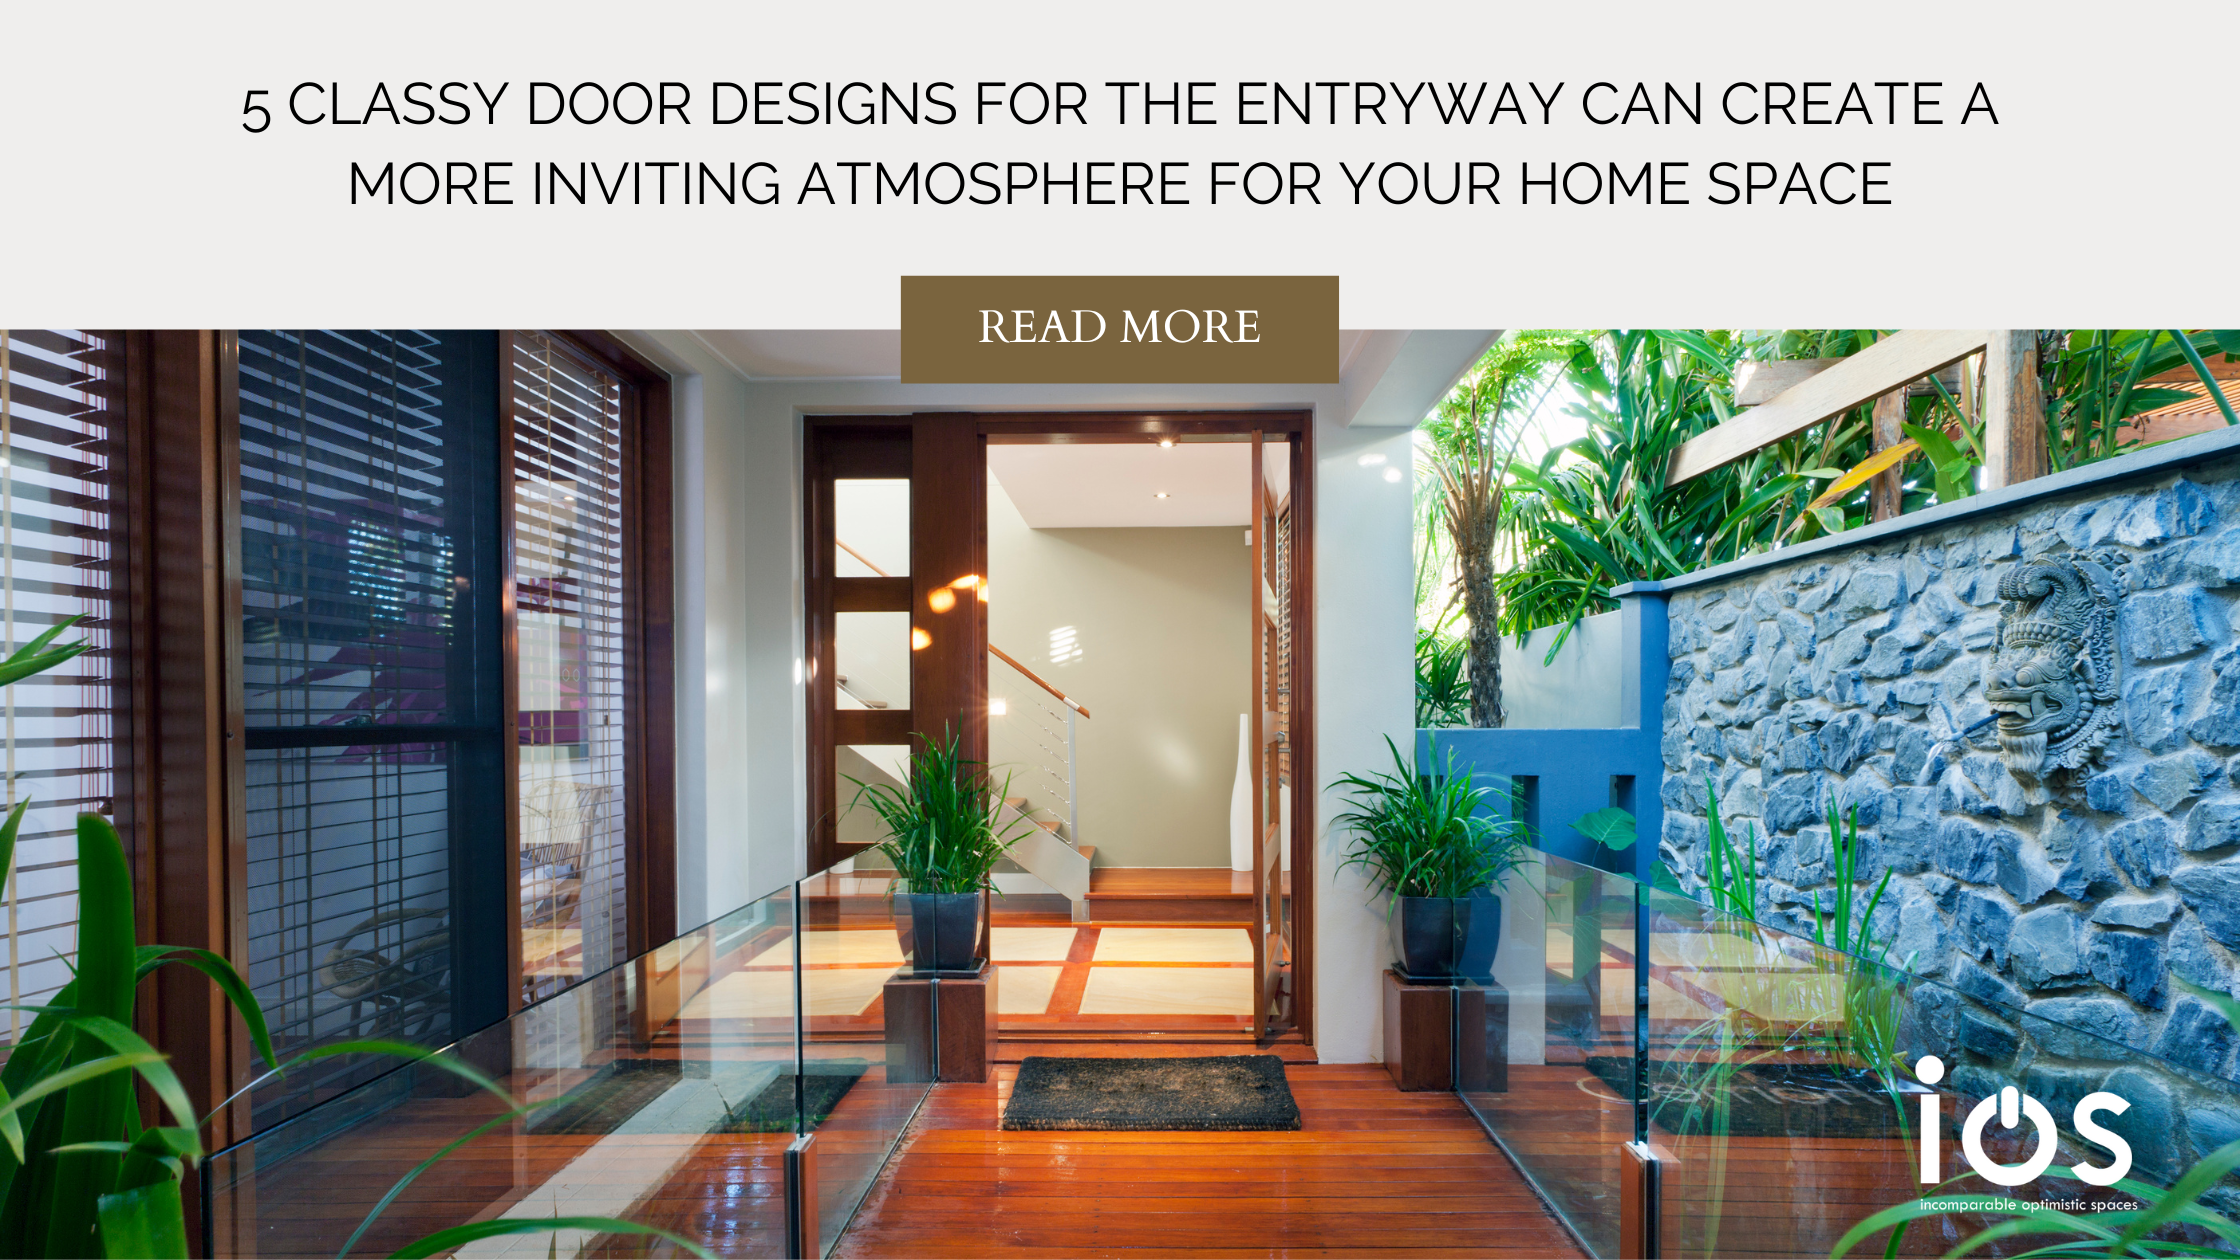 5 classy door designs for the entryway can create a more inviting atmosphere for your home space